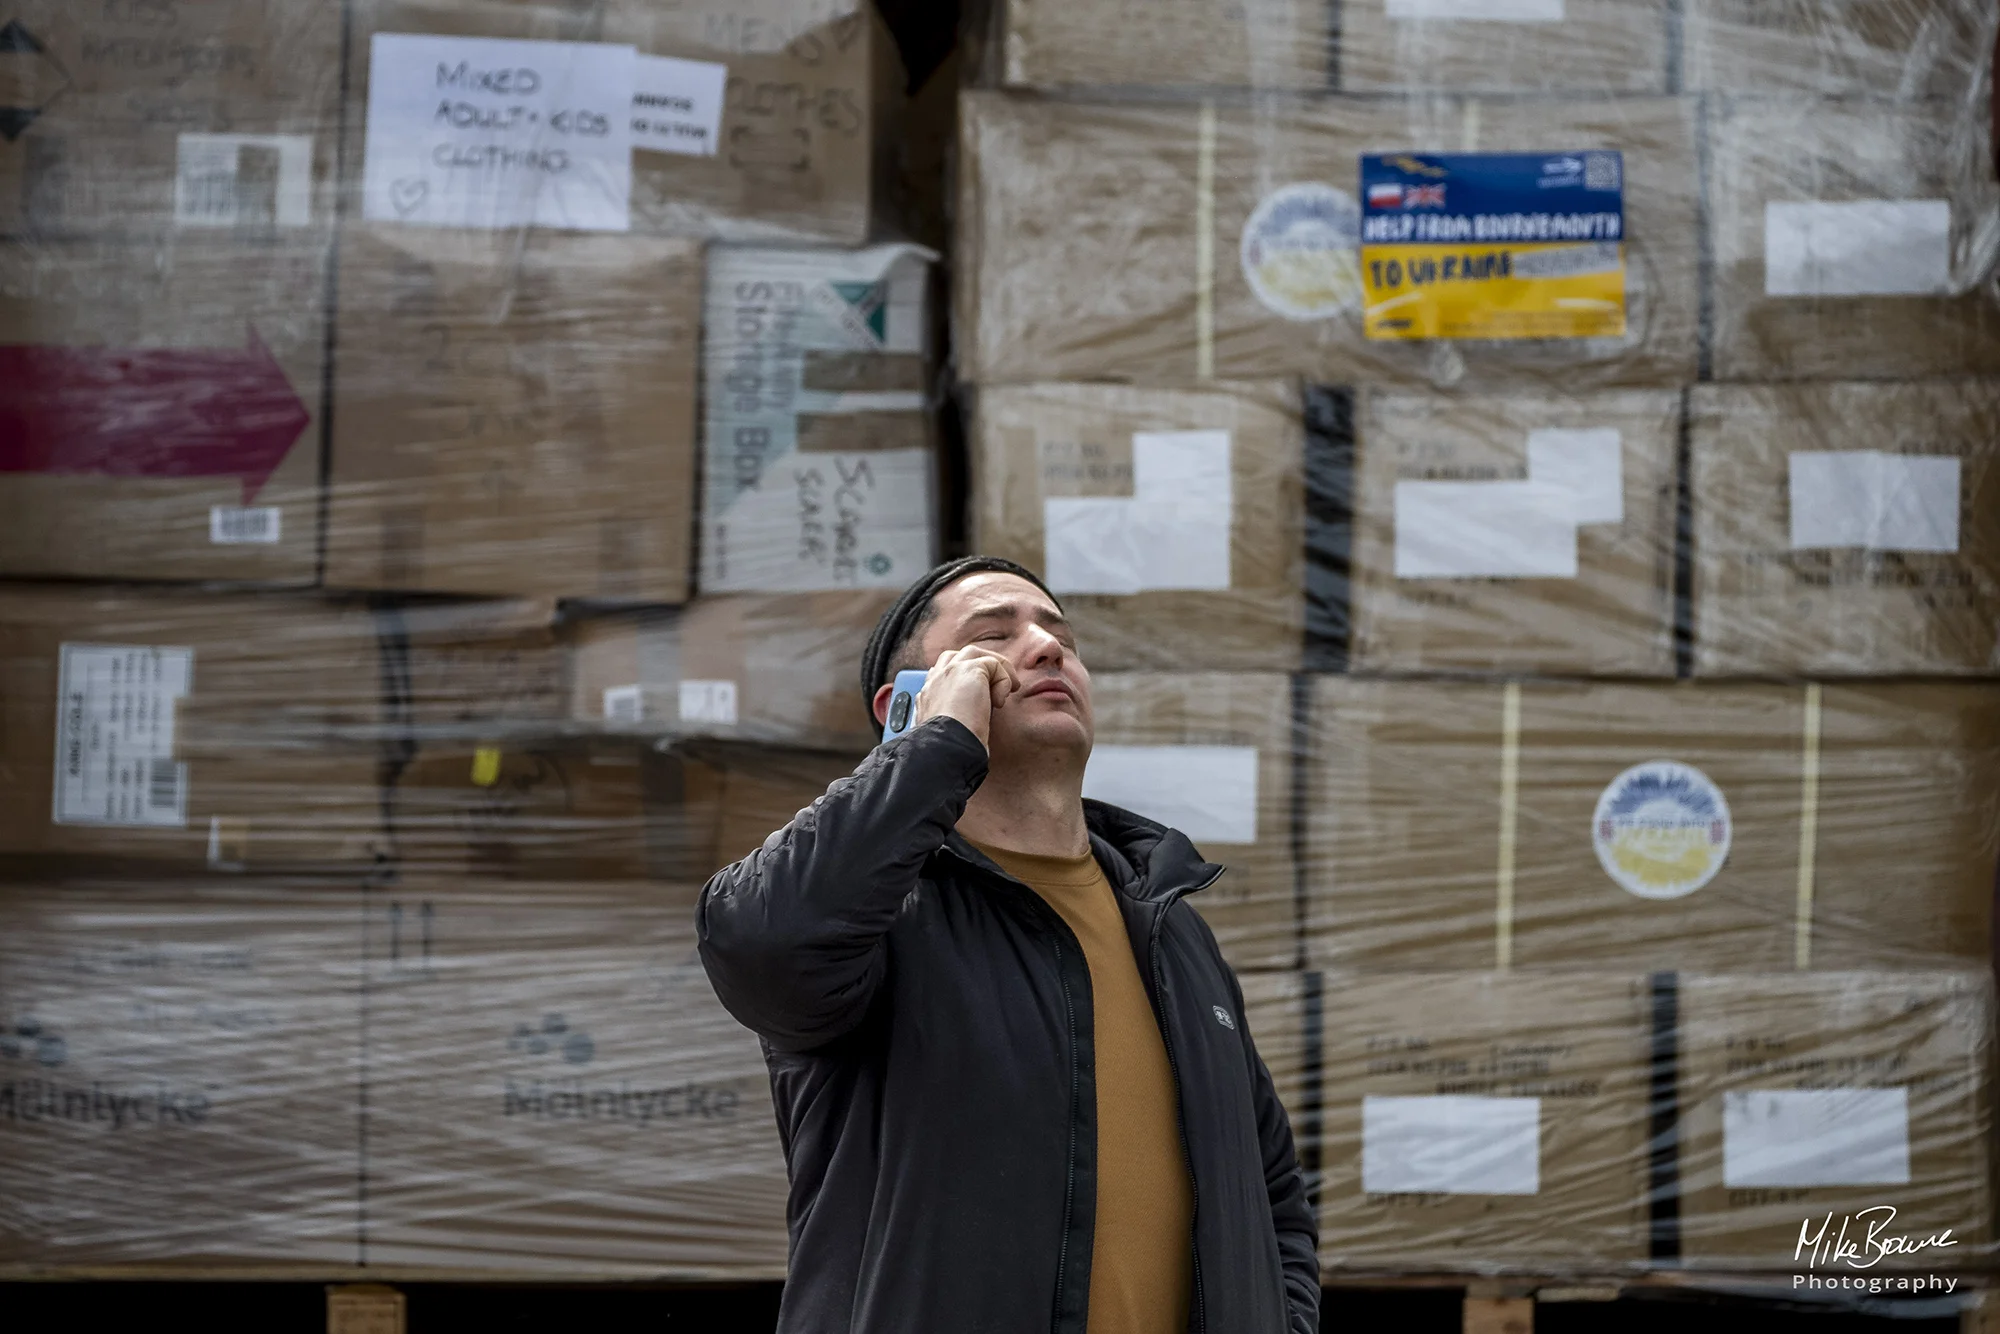 Man in front of aid to Ukraine with a pained expression holding phone to his ear